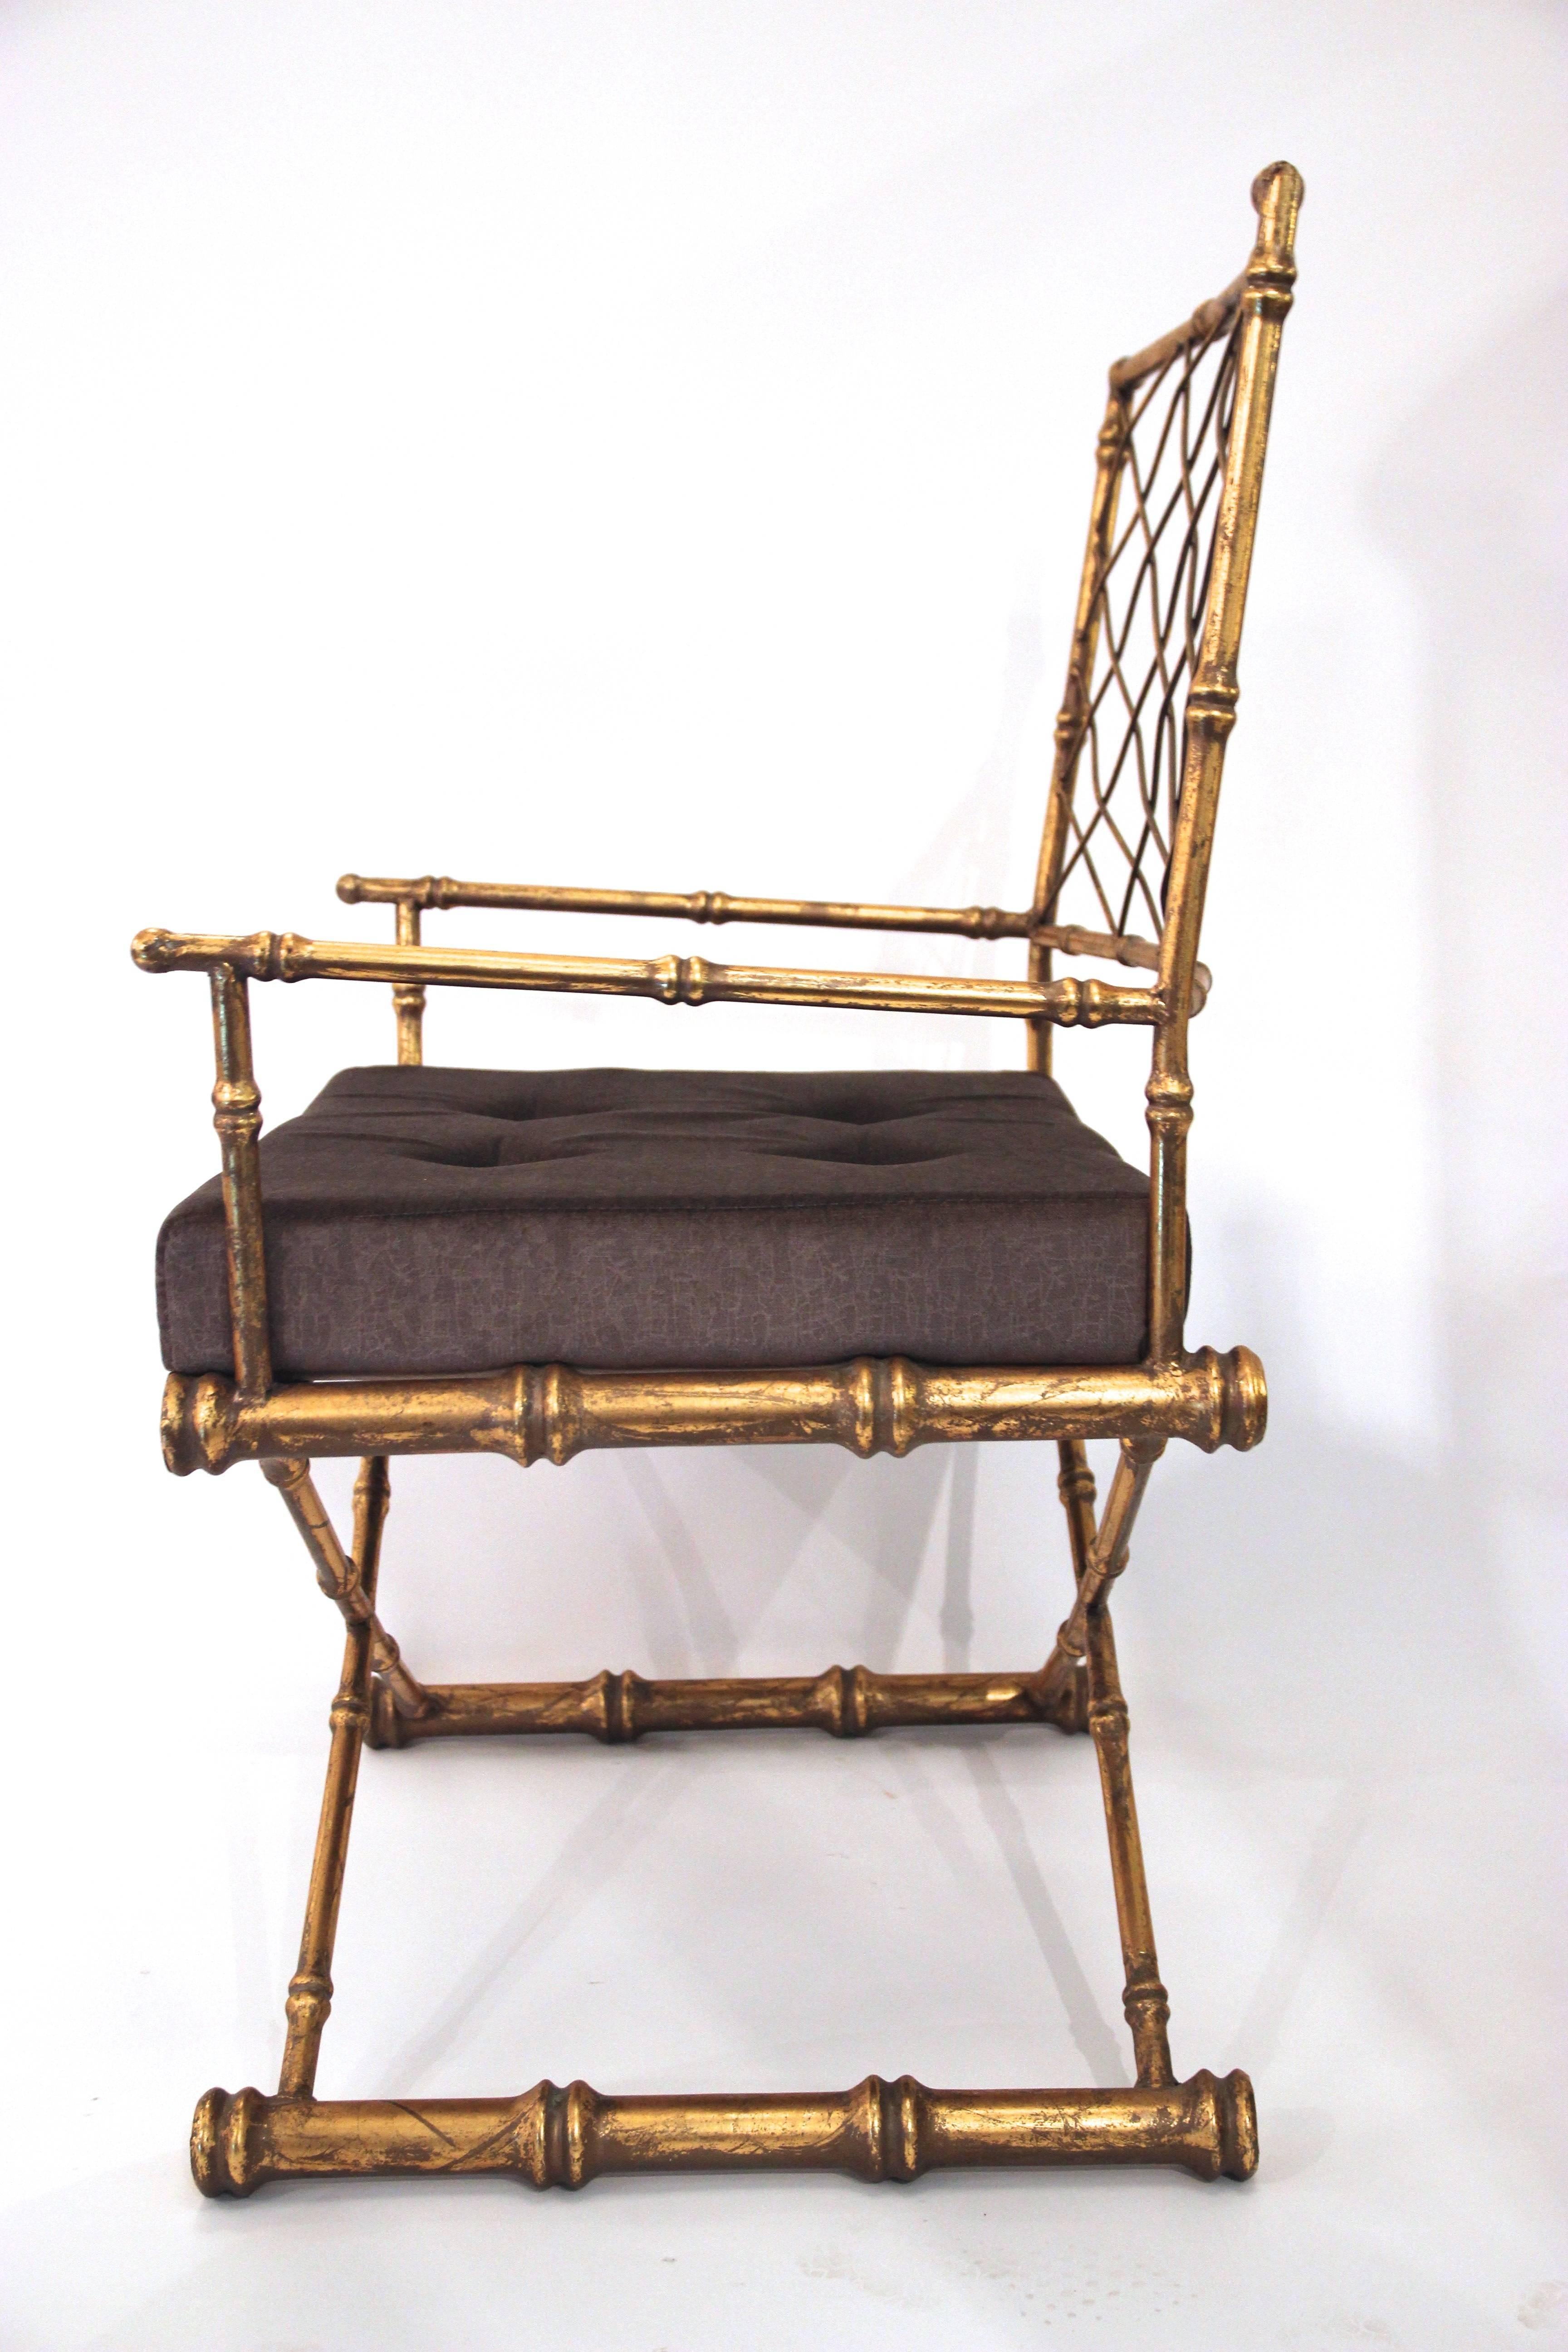 Pair of armchairs,
gilded iron, antique style,
circa 1970, France.
Measures: Height 90 cm, seat height 50 cm, width 60 cm, depth 50 cm.